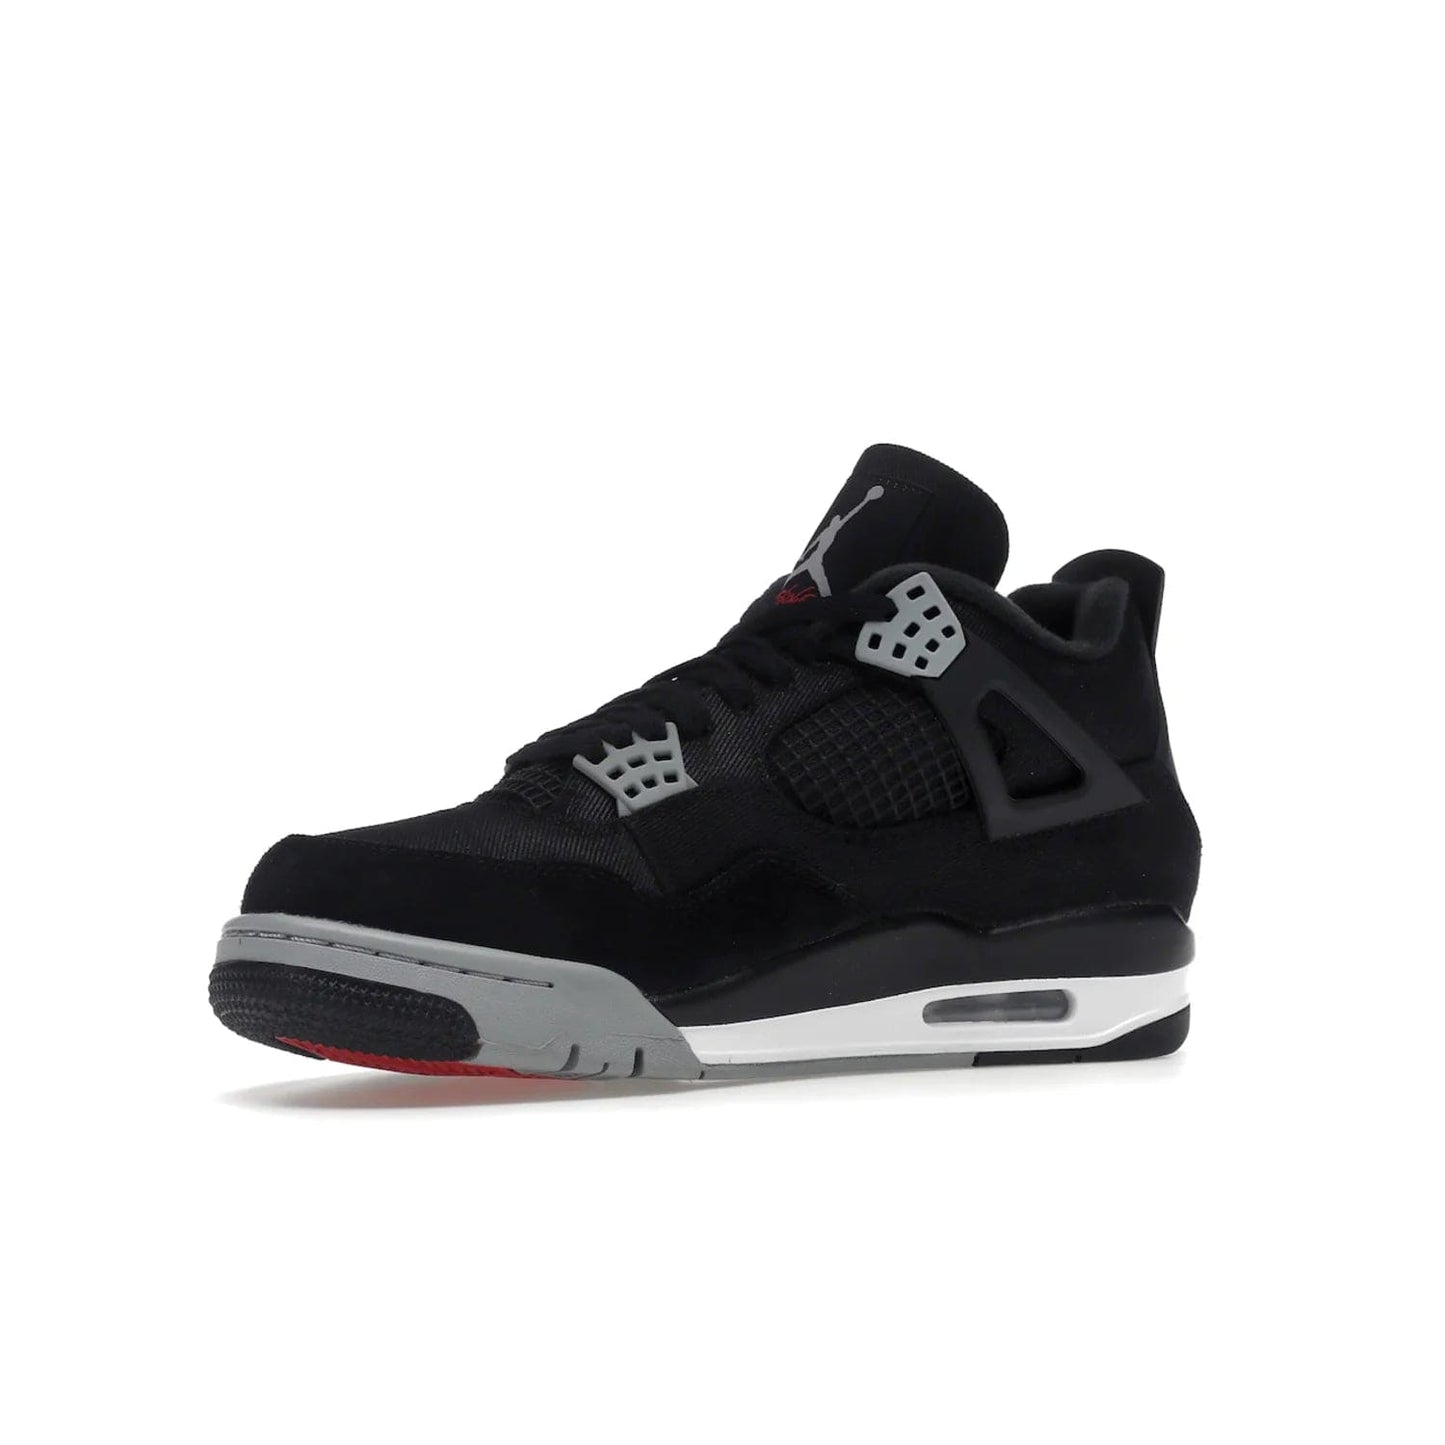 Jordan 4 Retro SE Black Canvas - Image 16 - Only at www.BallersClubKickz.com - The Air Jordan 4 Retro SE Black Canvas brings timeless style and modern luxury. Classic mid-top sneaker in black canvas and grey suede with tonal Jumpman logo, Flight logo and polyurethane midsole with visible Air-sole cushioning. Refresh your sneaker collection and rock the Air Jordan 4 Retro SE Black Canvas.